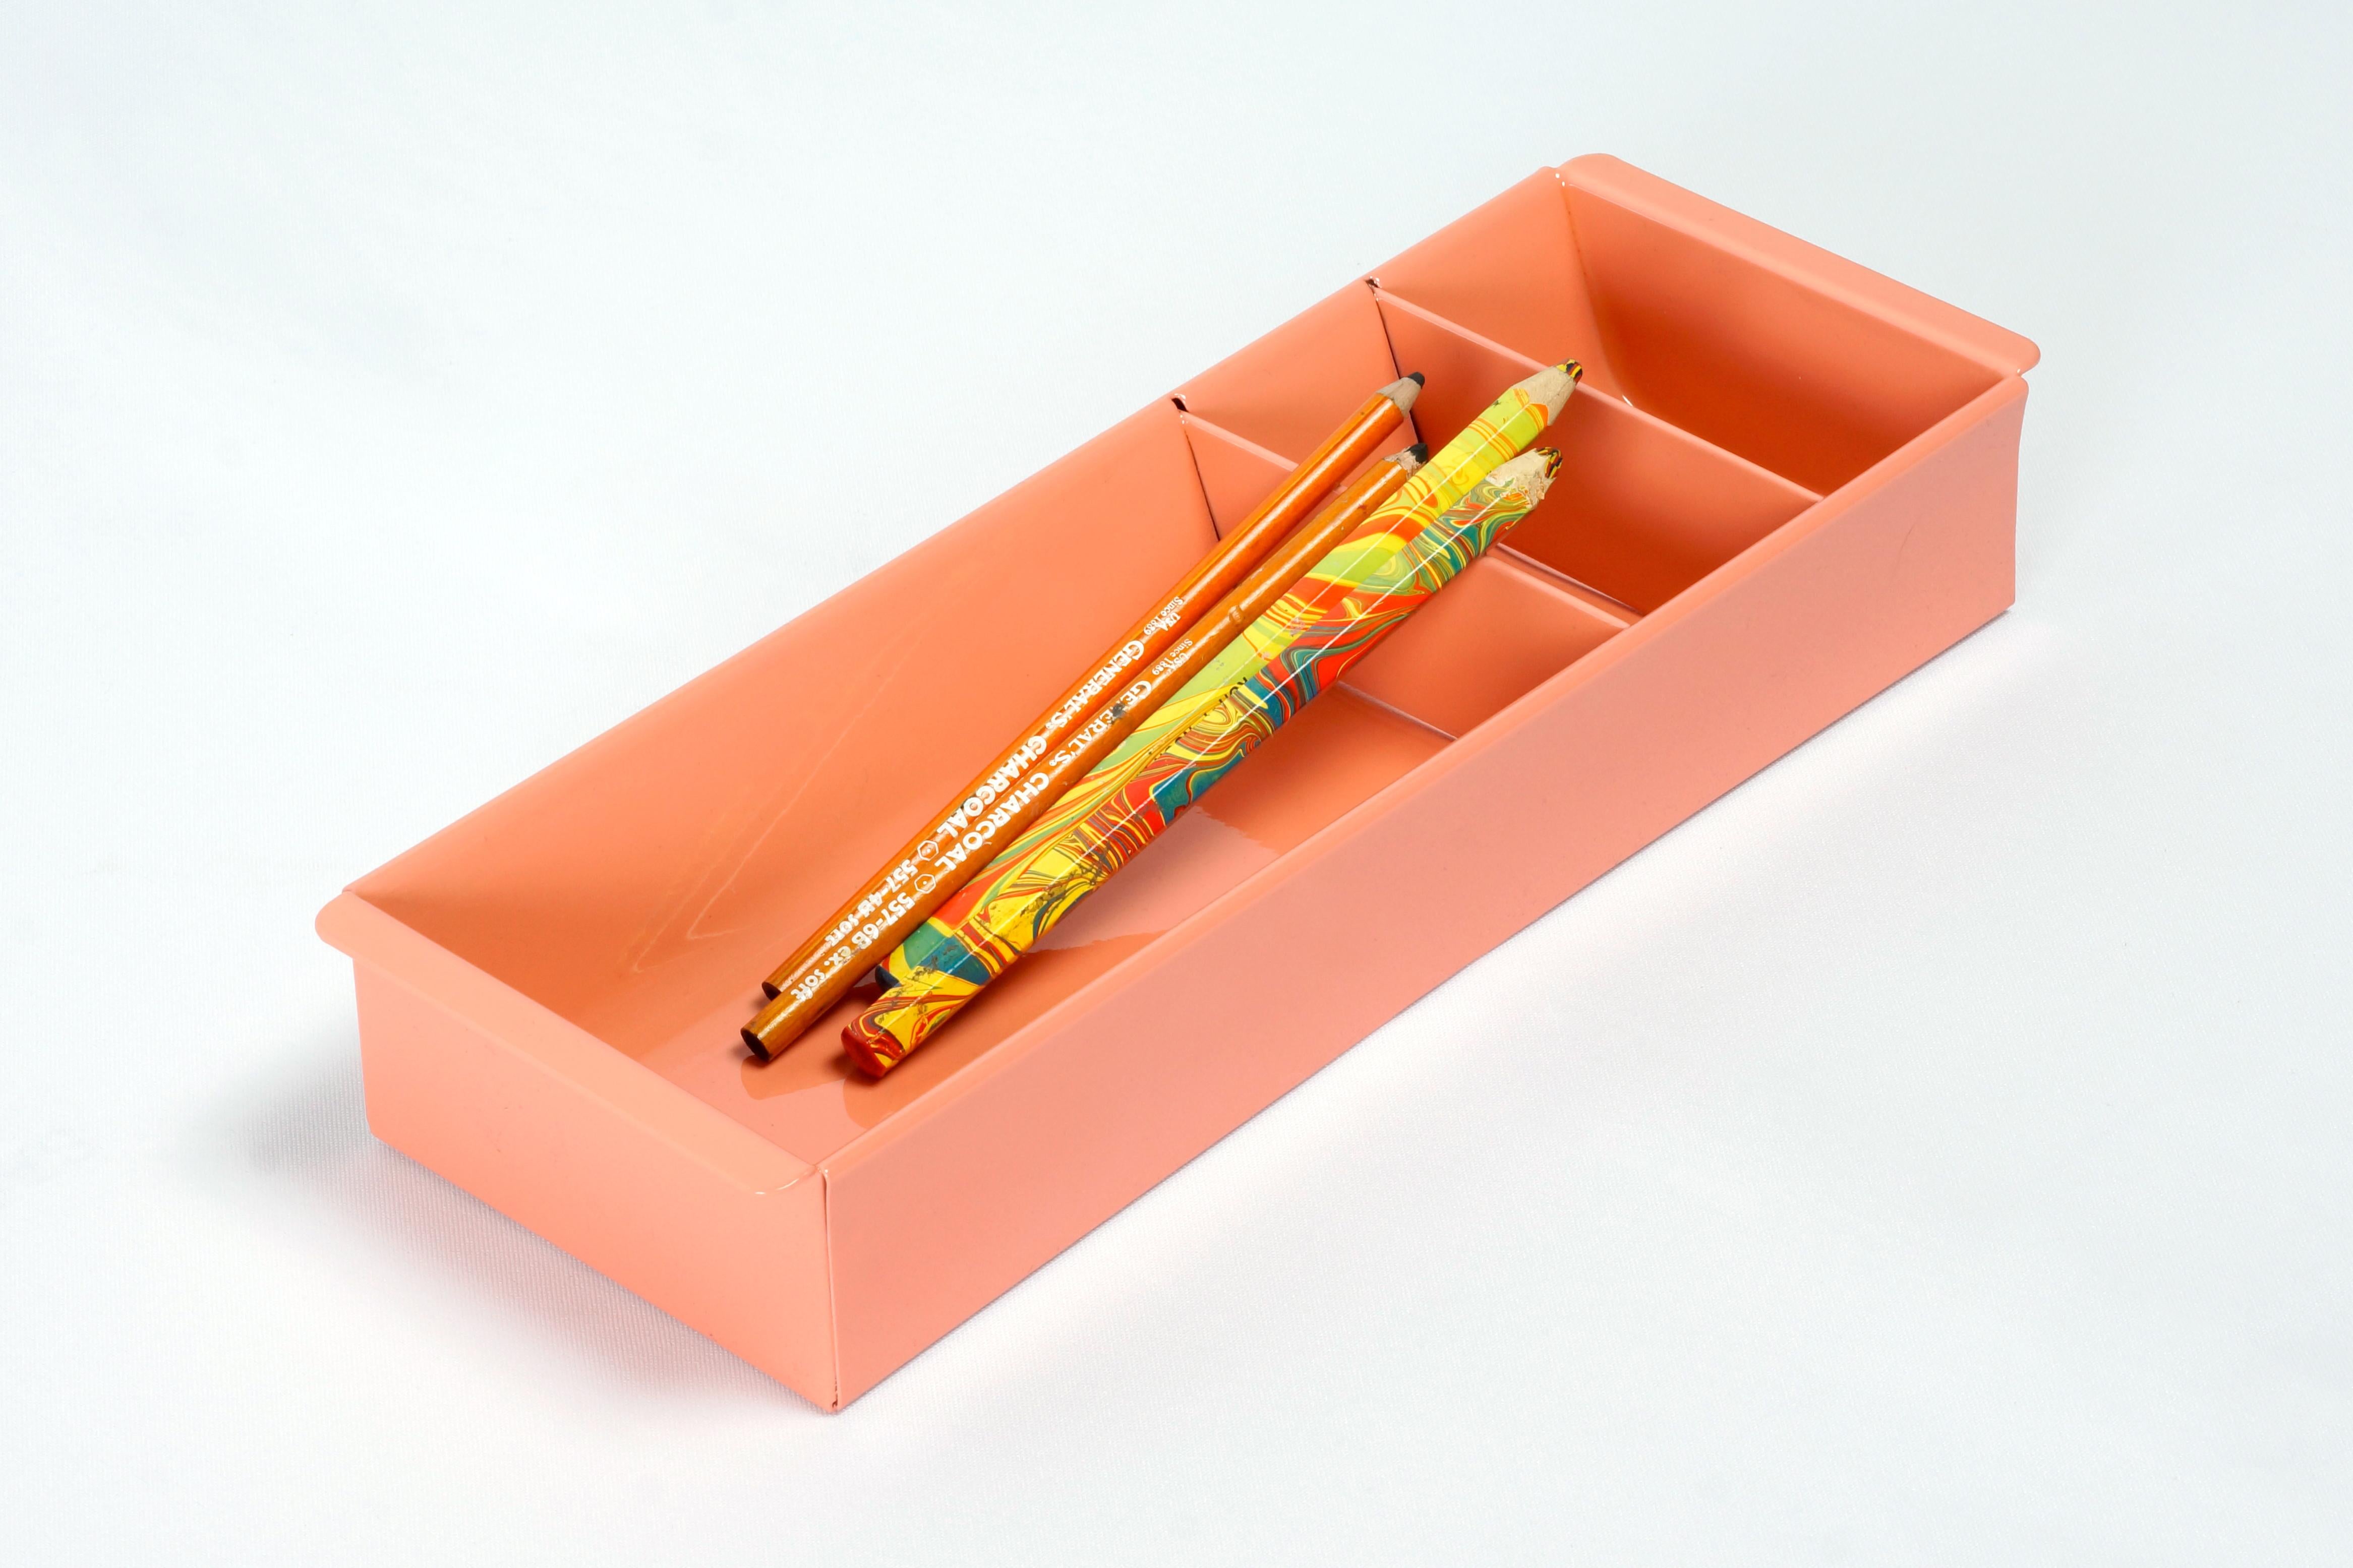 Once the insert to a Classic tanker desk's utility drawer, we repurposed this neat Industrial piece for use as a desktop organizer. Steel has been newly powder-coated in a pop of high gloss Peach. Features three slots, ideal for storing coins, pens